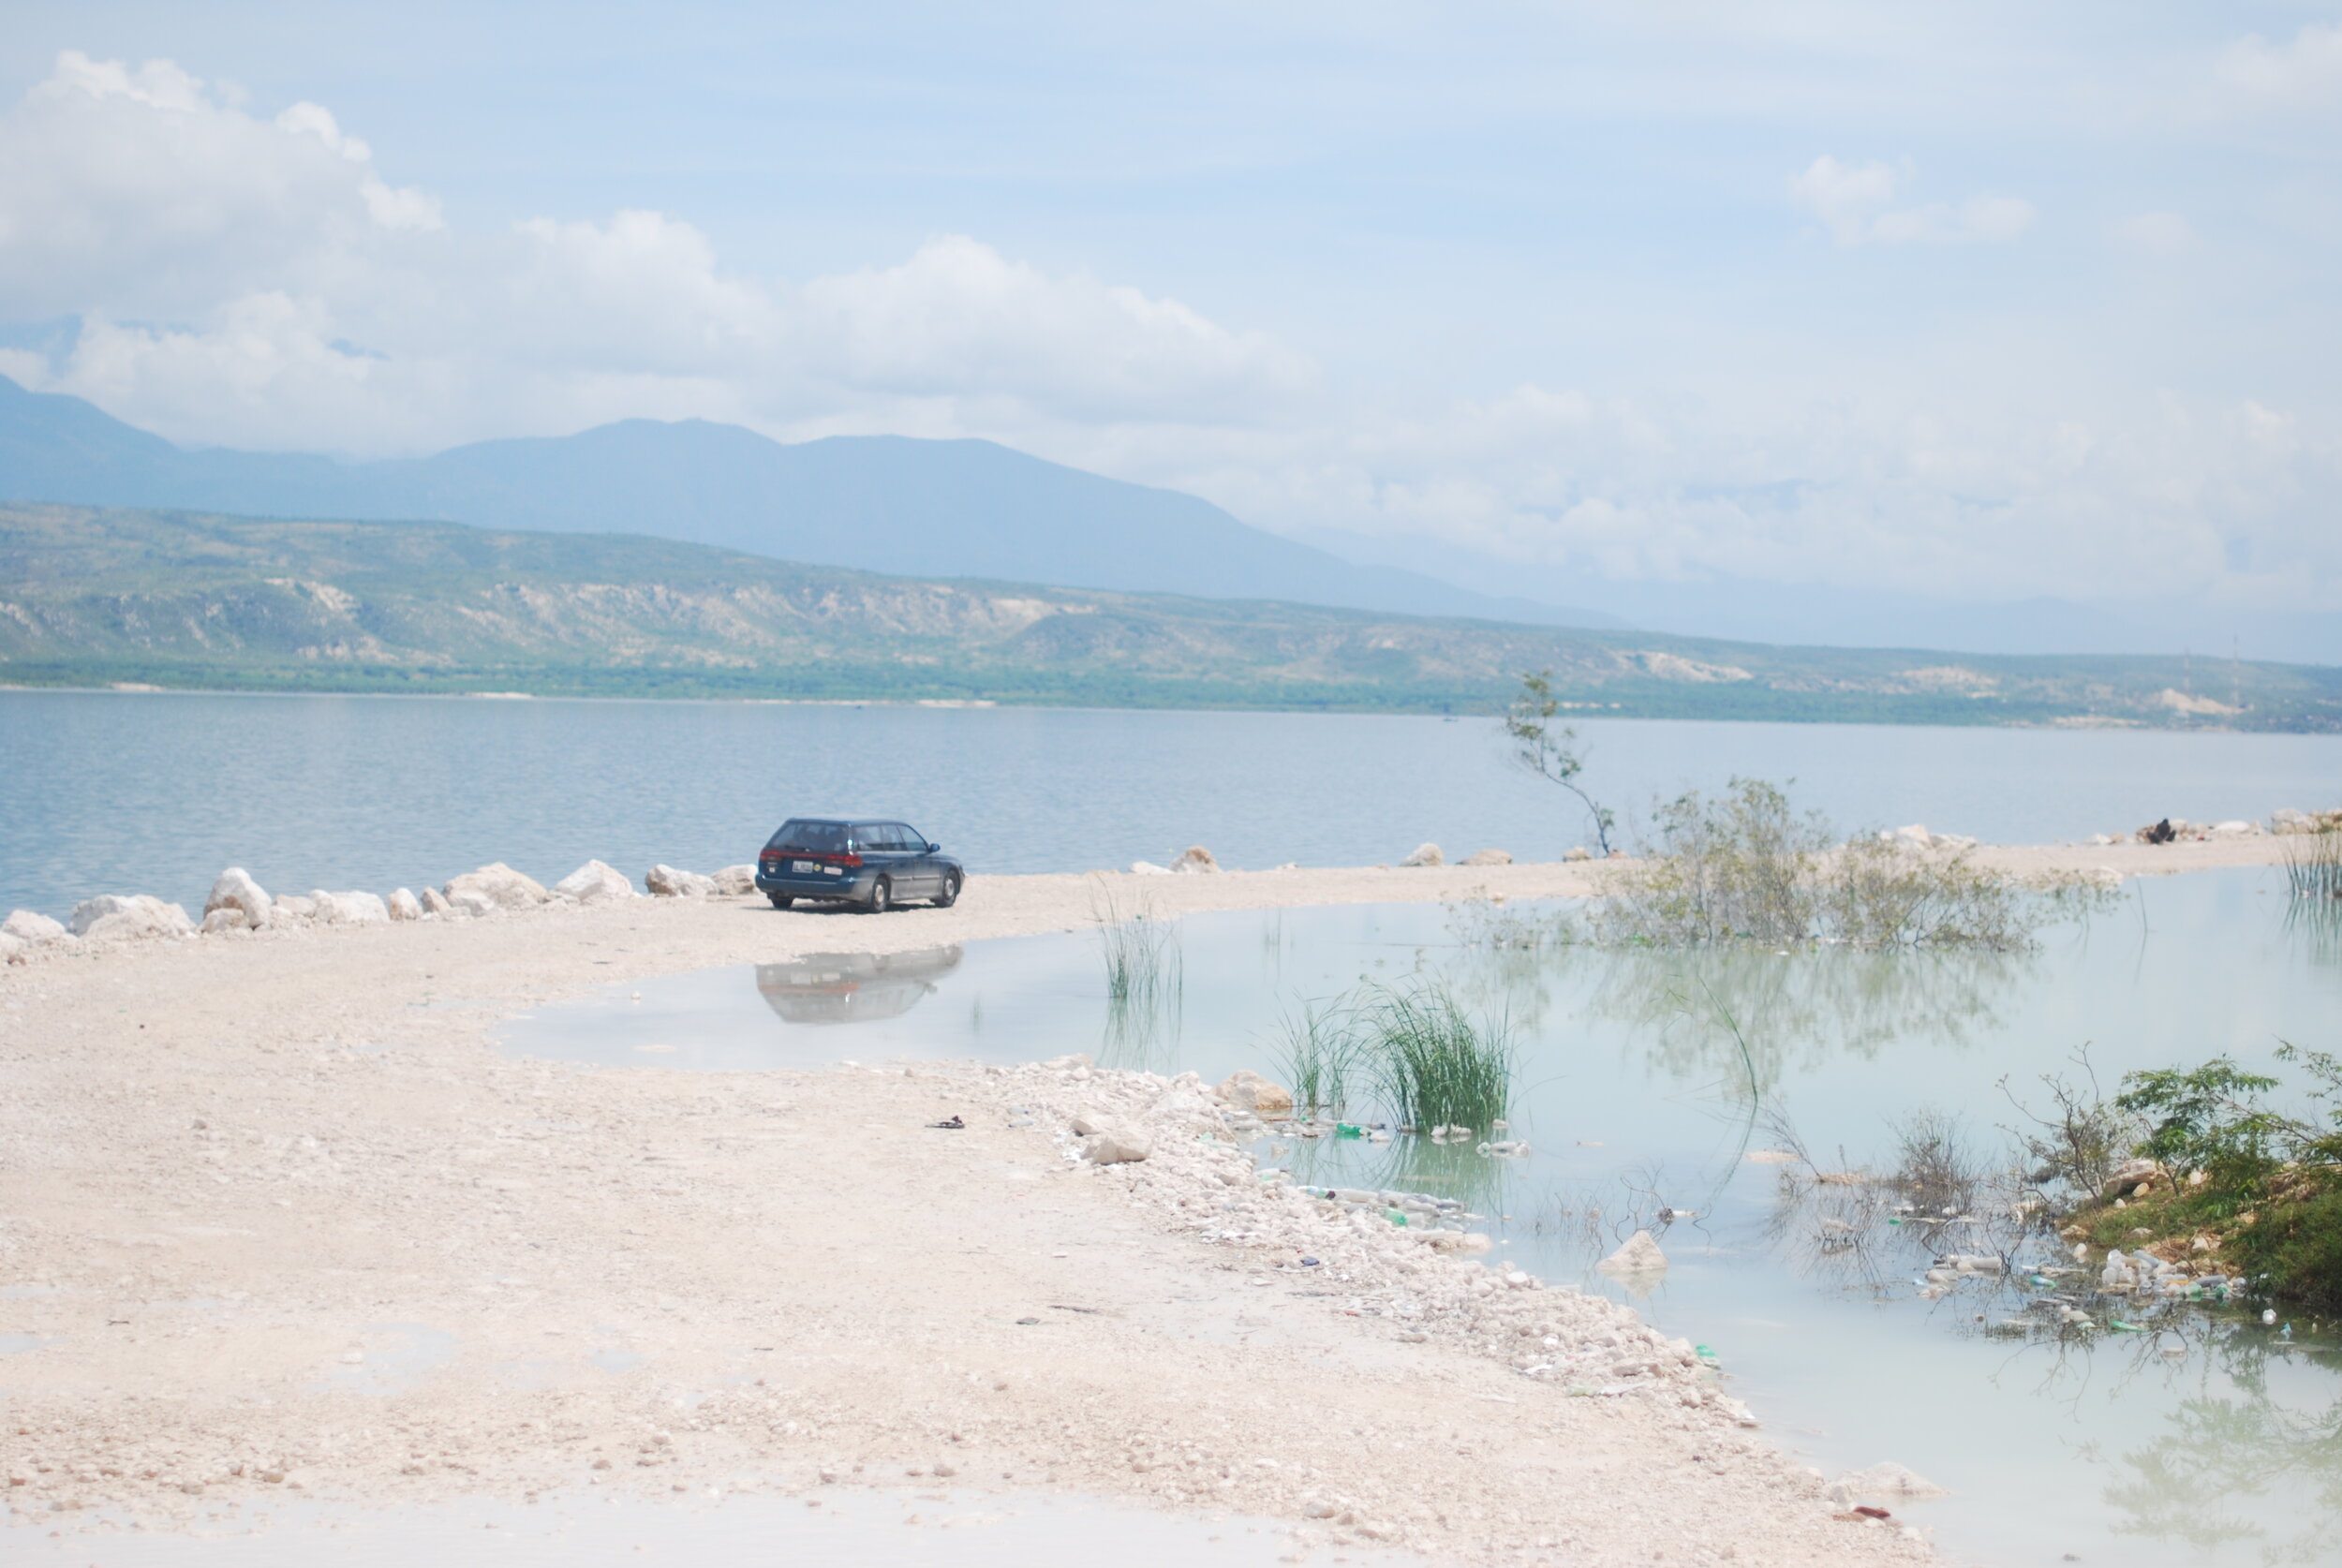 Siri B.L for Wikimedia Commons. Image is of a blue vehicle on the main road from Jimaní, Dominican Republic to Port-au-Prince, Haiti. The pathway is partially flooded by the Lake Azuei.